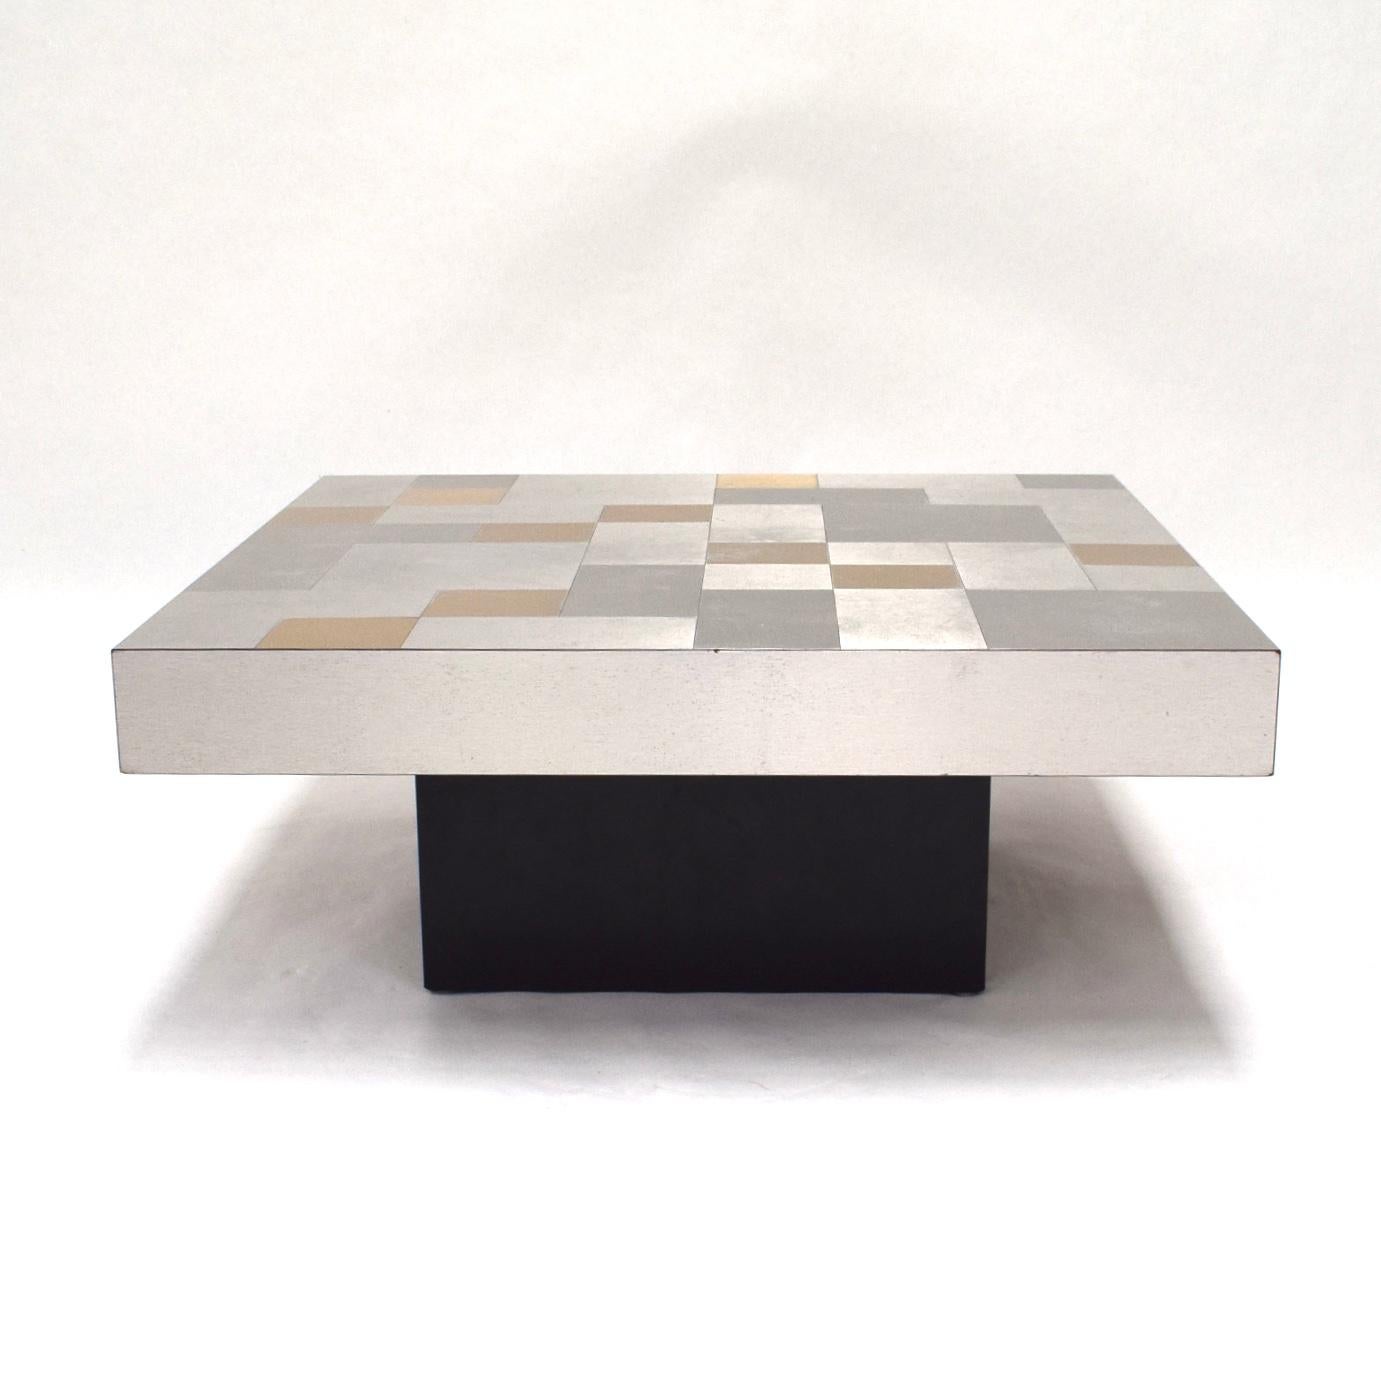 European 1970s Coffee Table with Aluminium Mosaic Top Gold and Silver Colored